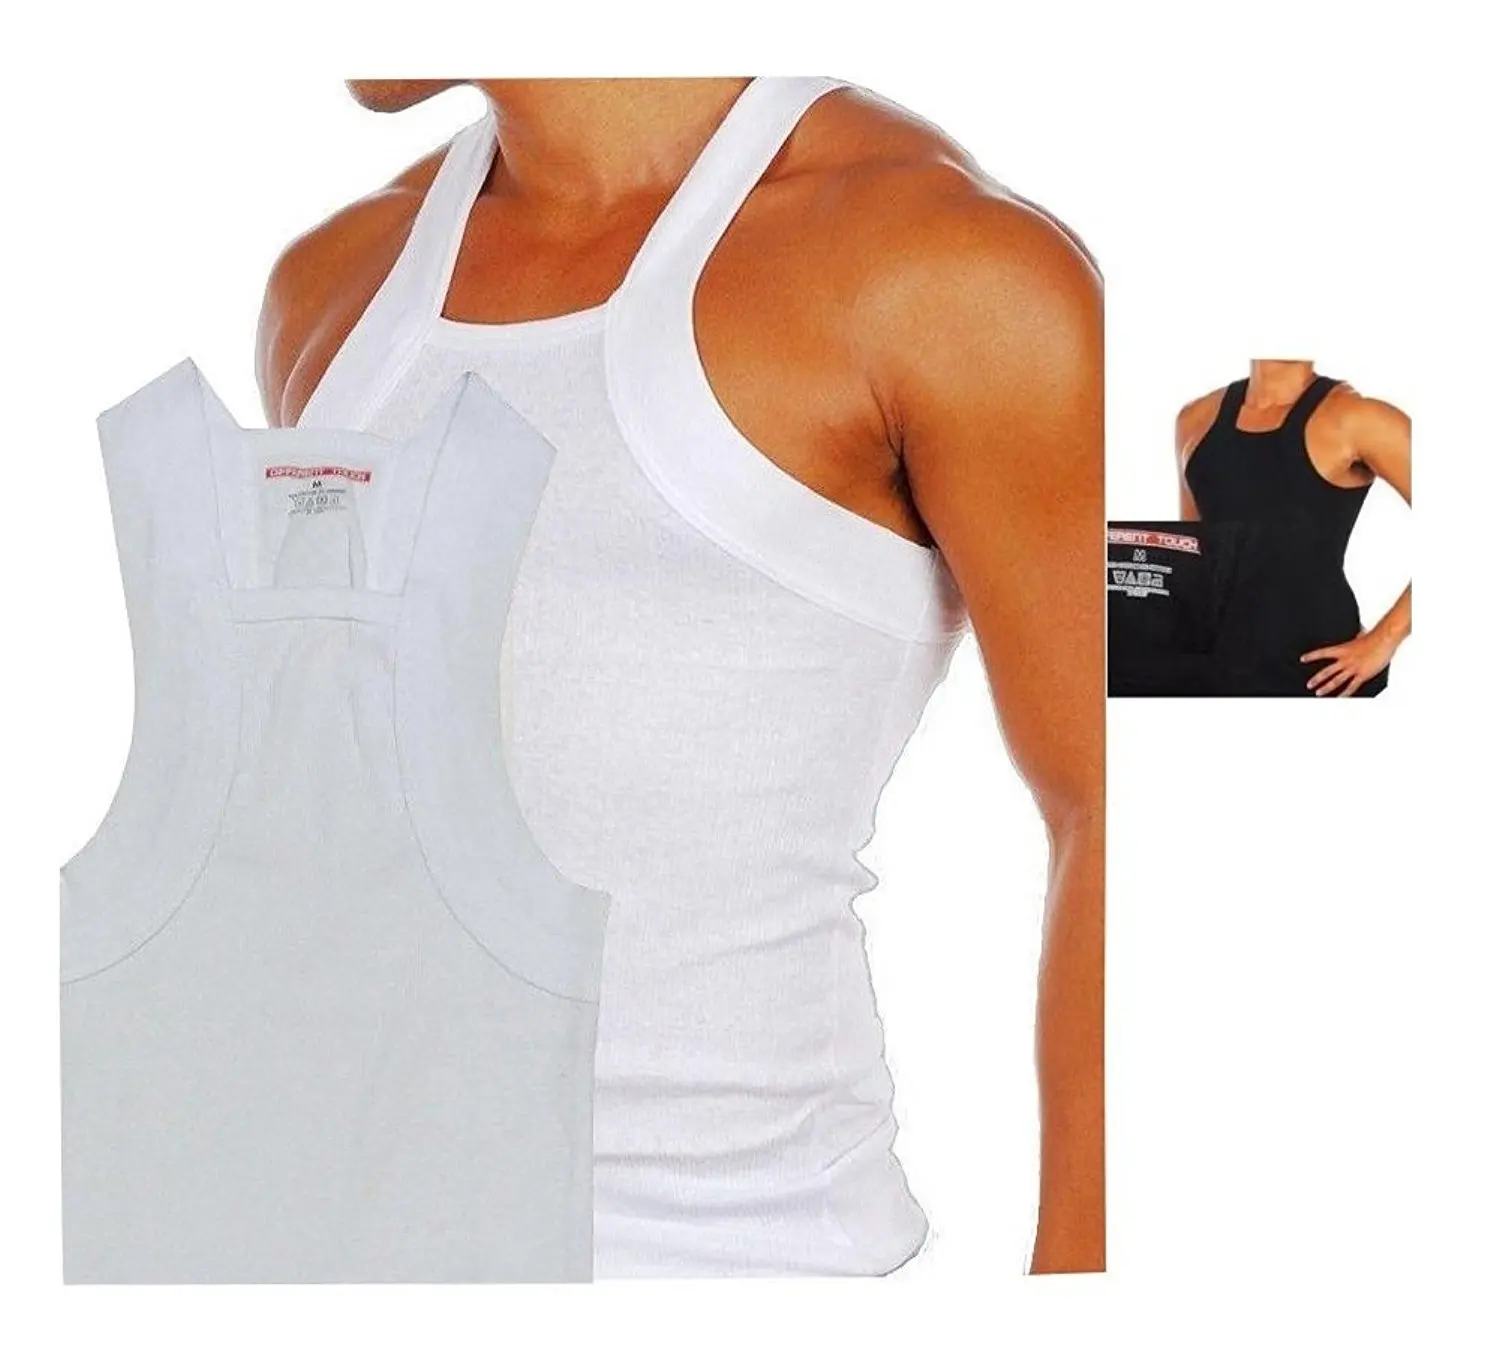 Different Touch Mens G-unit Style Tank Tops Square Cut Muscle Rib A-Shirts Pack of 2